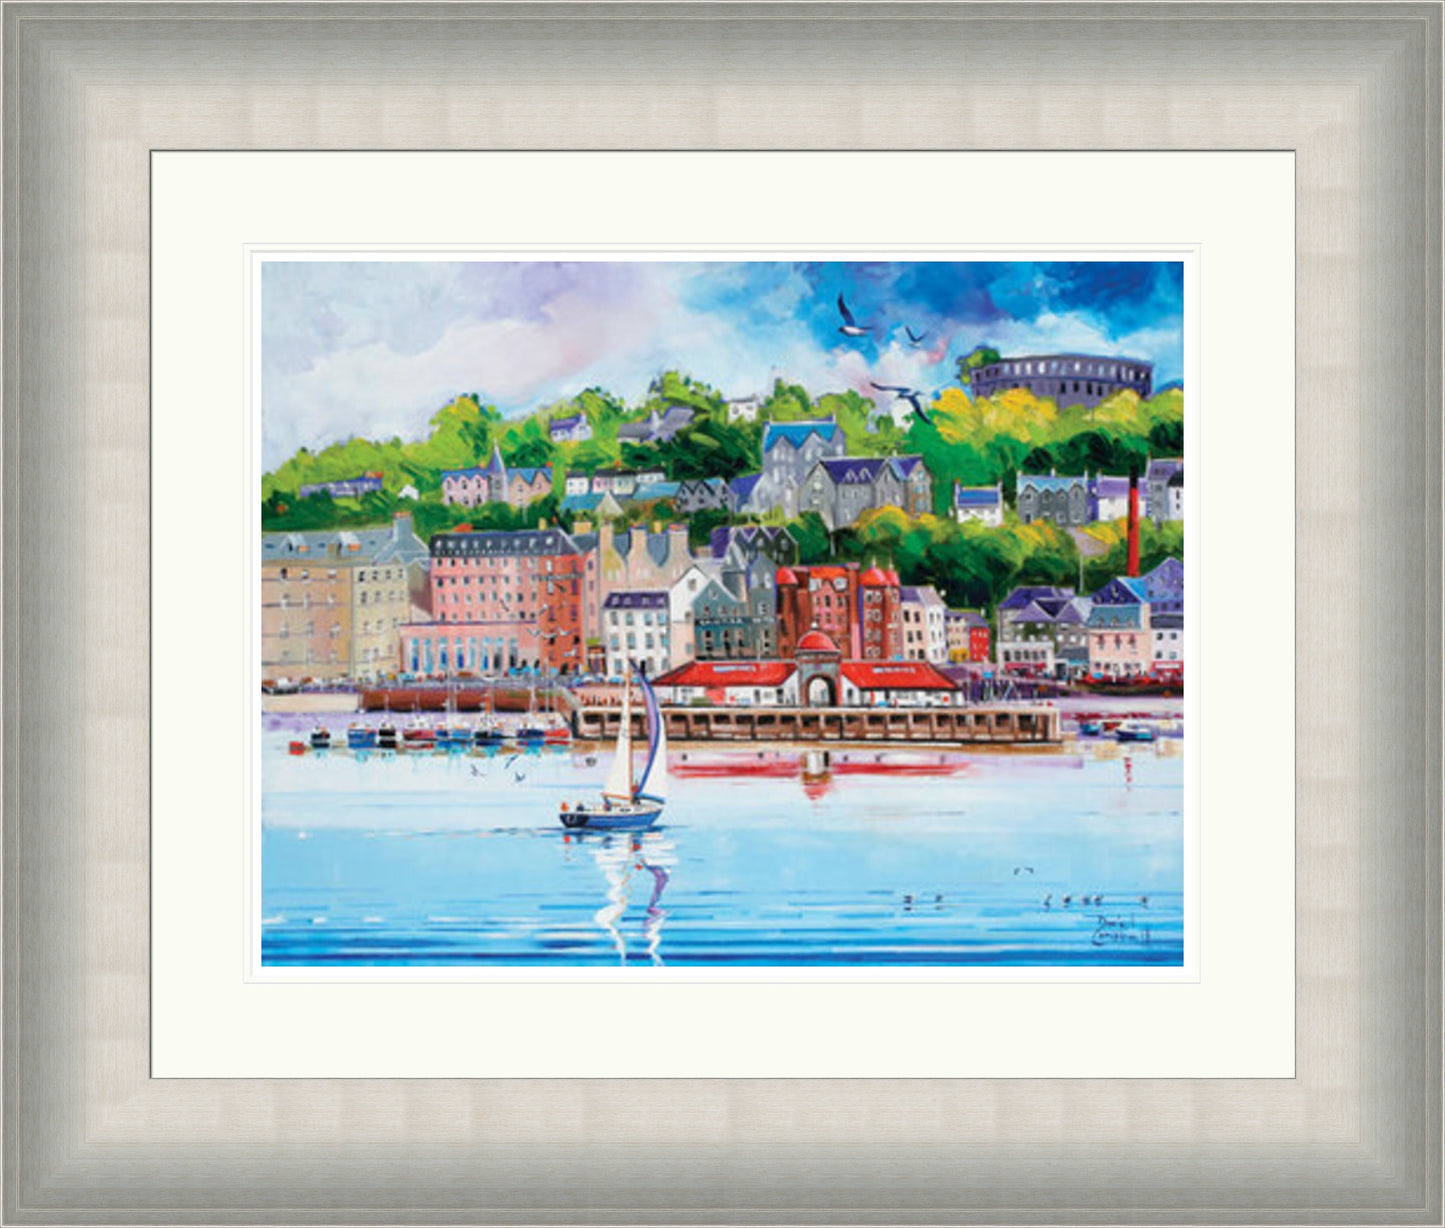 Sailing Into Oban by Daniel Campbell